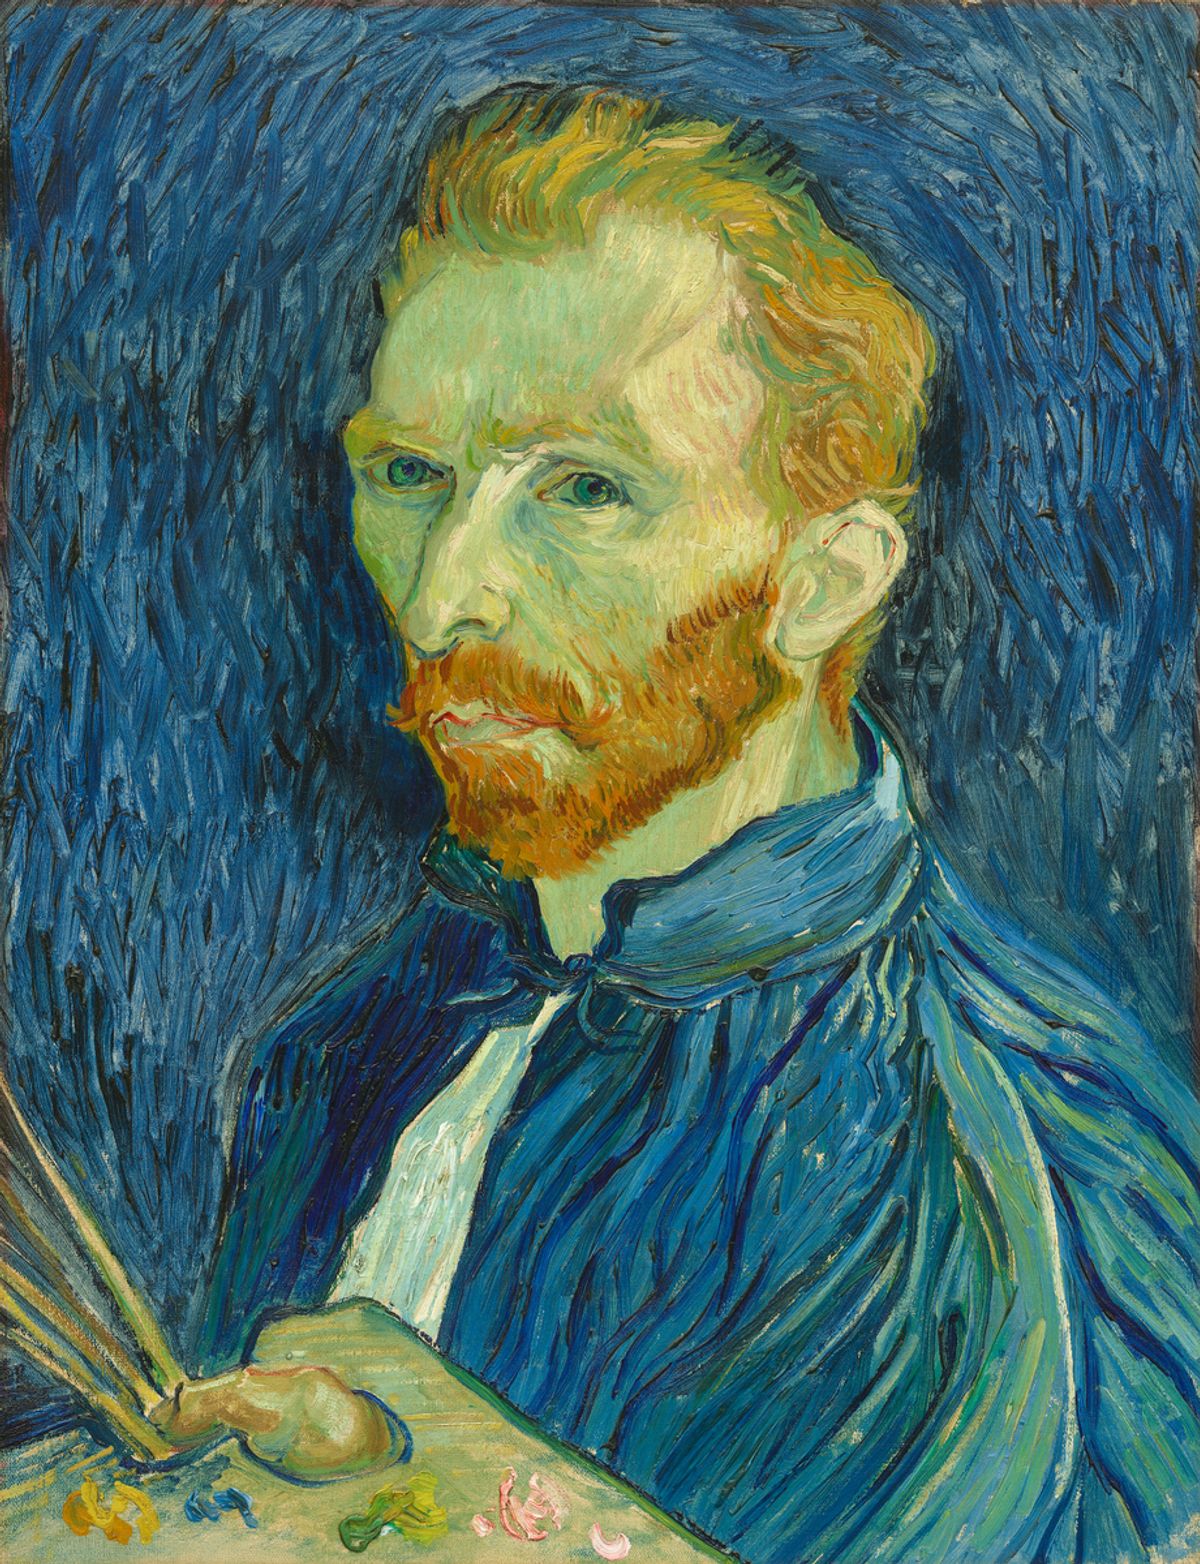 Vincent van Gogh’s Self-portrait (1889), painted in the asylum Courtesy of the National Gallery of Art, Washington, DC